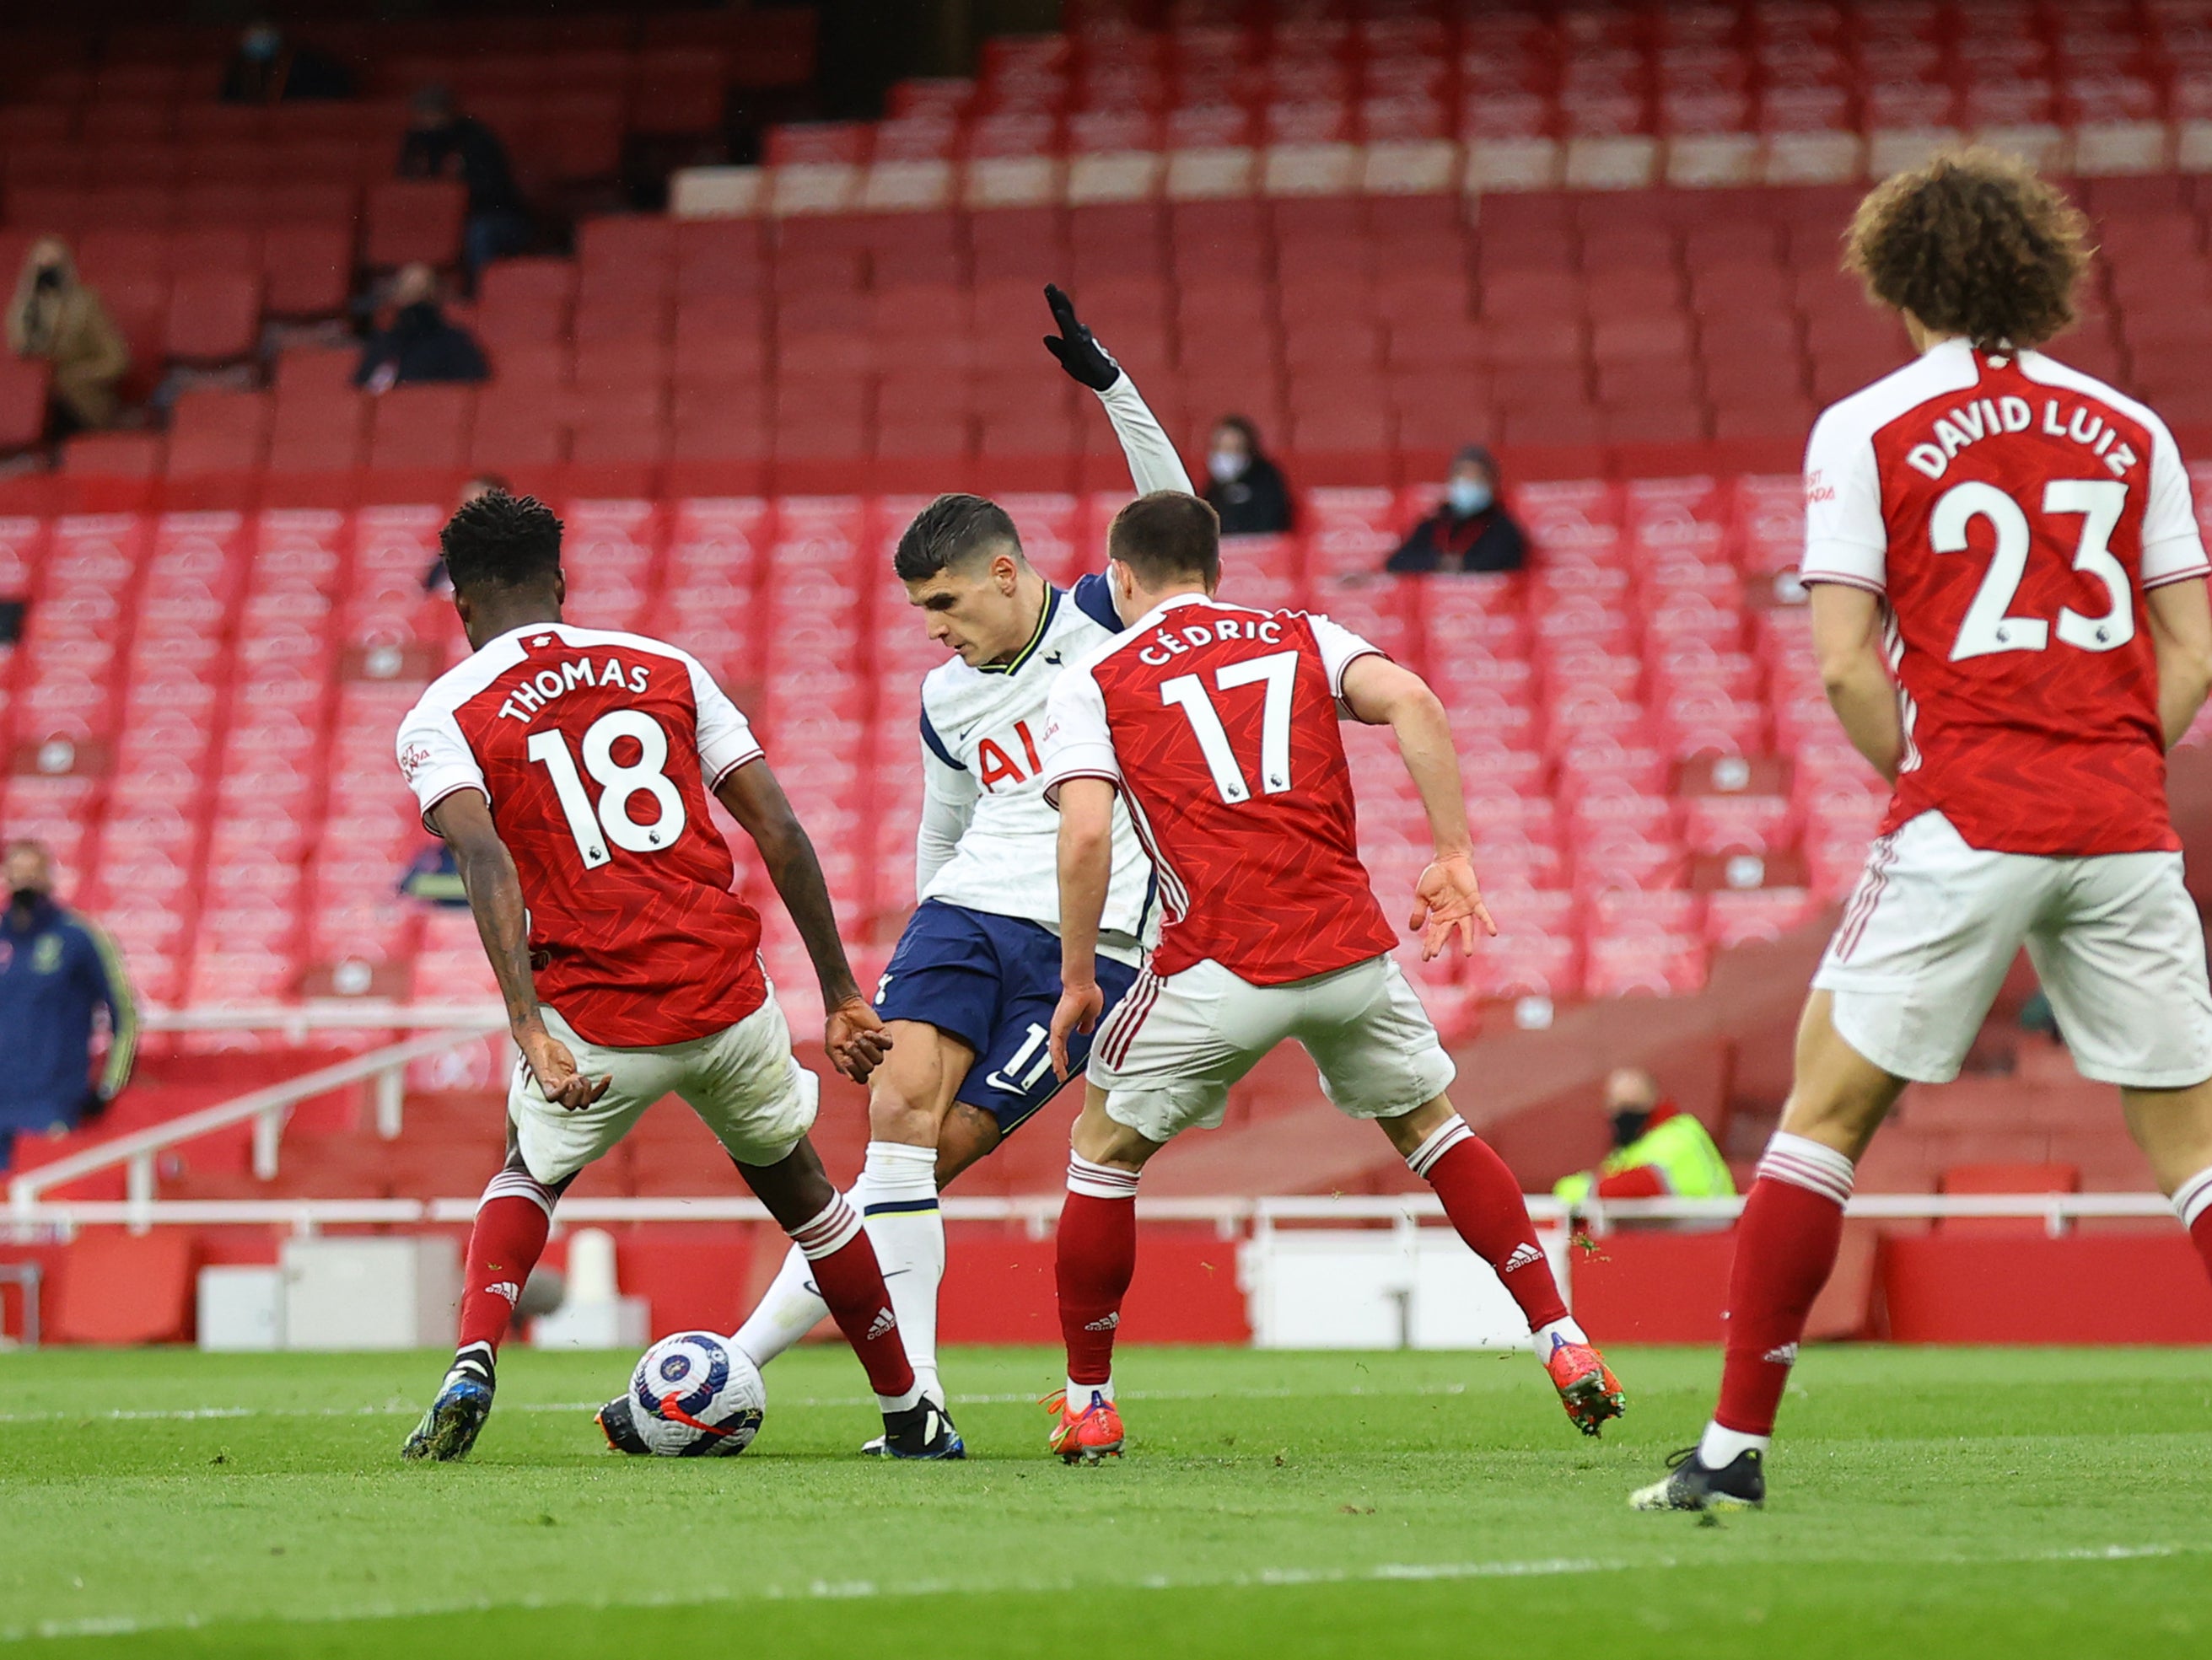 Lamela puts Spurs 1-0 up against Arsenal with a jaw-dropping piece of skill